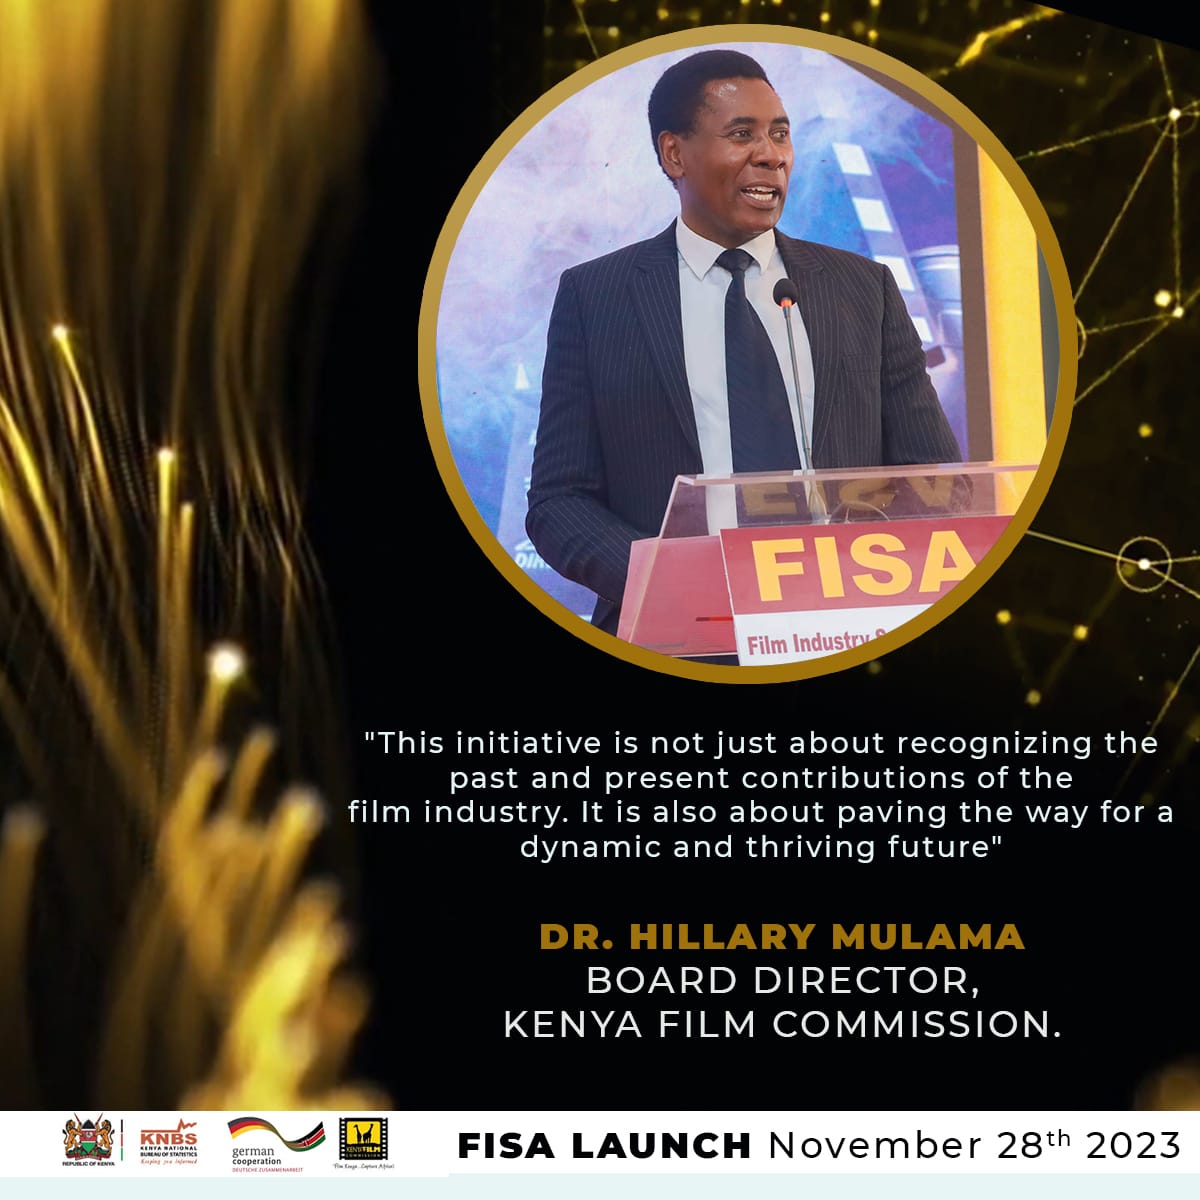 This initiative is not just about recognizing the past and present contributions of the film industry, it is also about paving way for a dynamic and thriving future. Dr. Hillary Mulama - Kenya Film Commission #FISARevolutionary